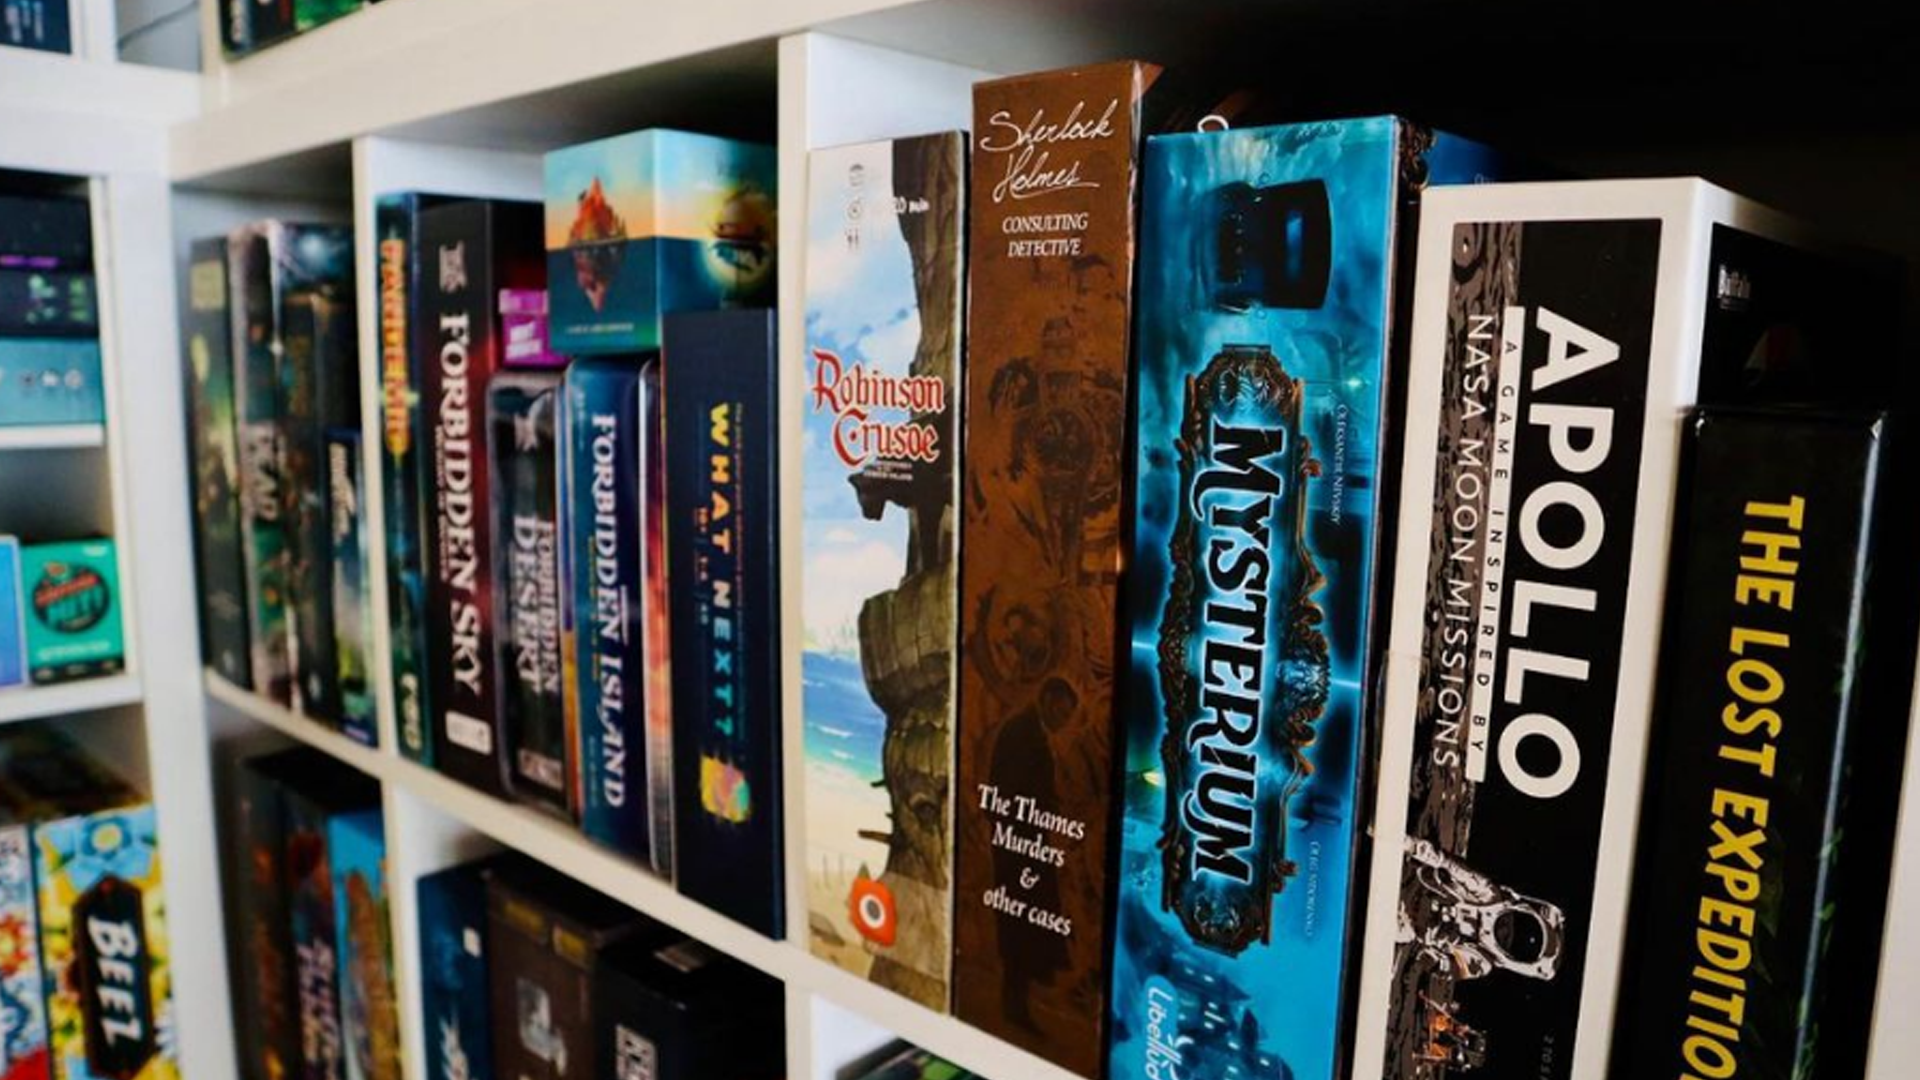 The board game collection from Sliced and Dice board game cafe